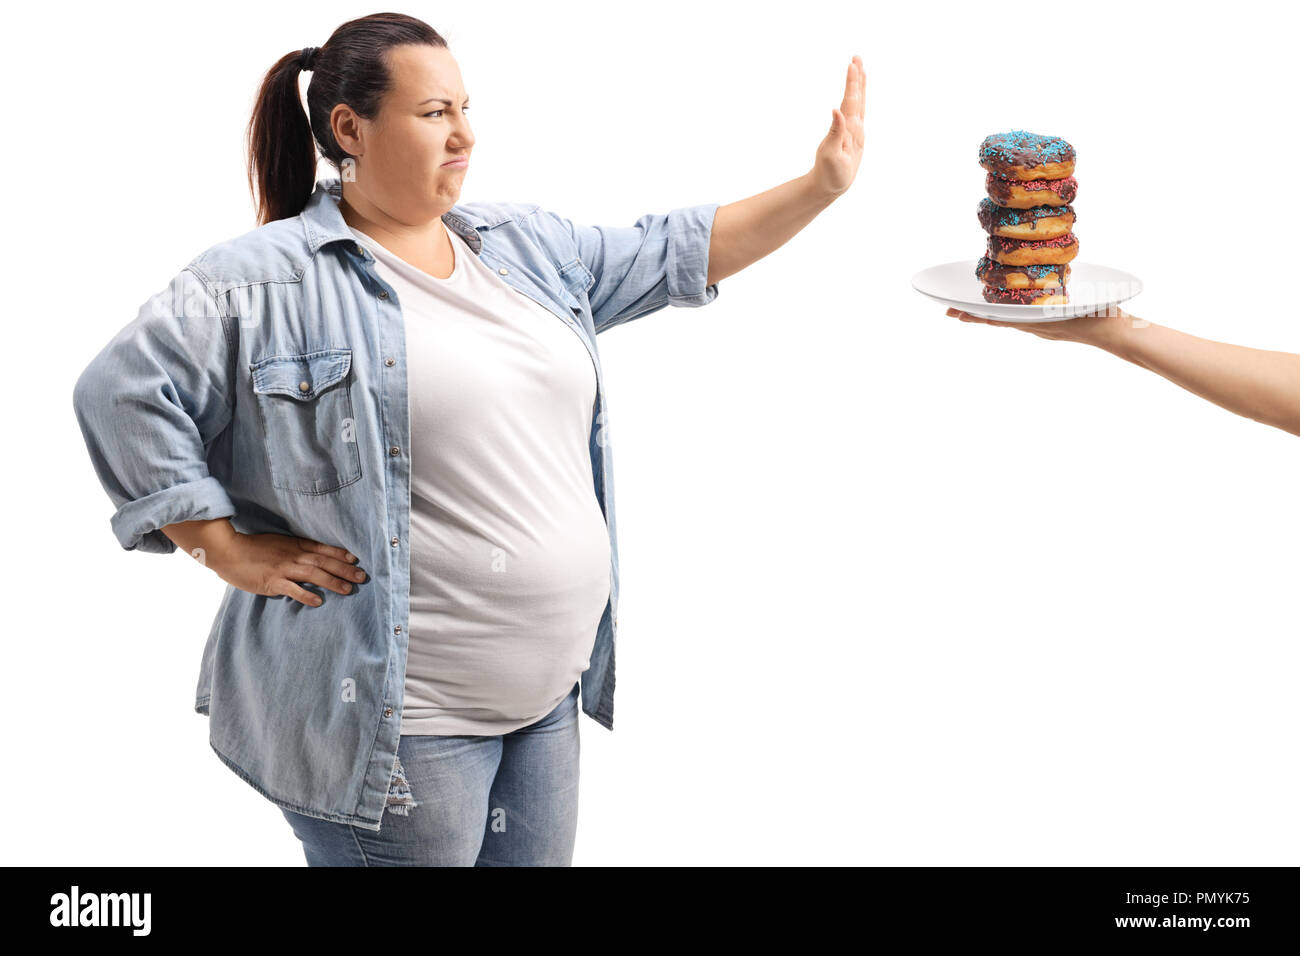 Overweight woman refusing to eat donuts isolated on white background Stock Photo